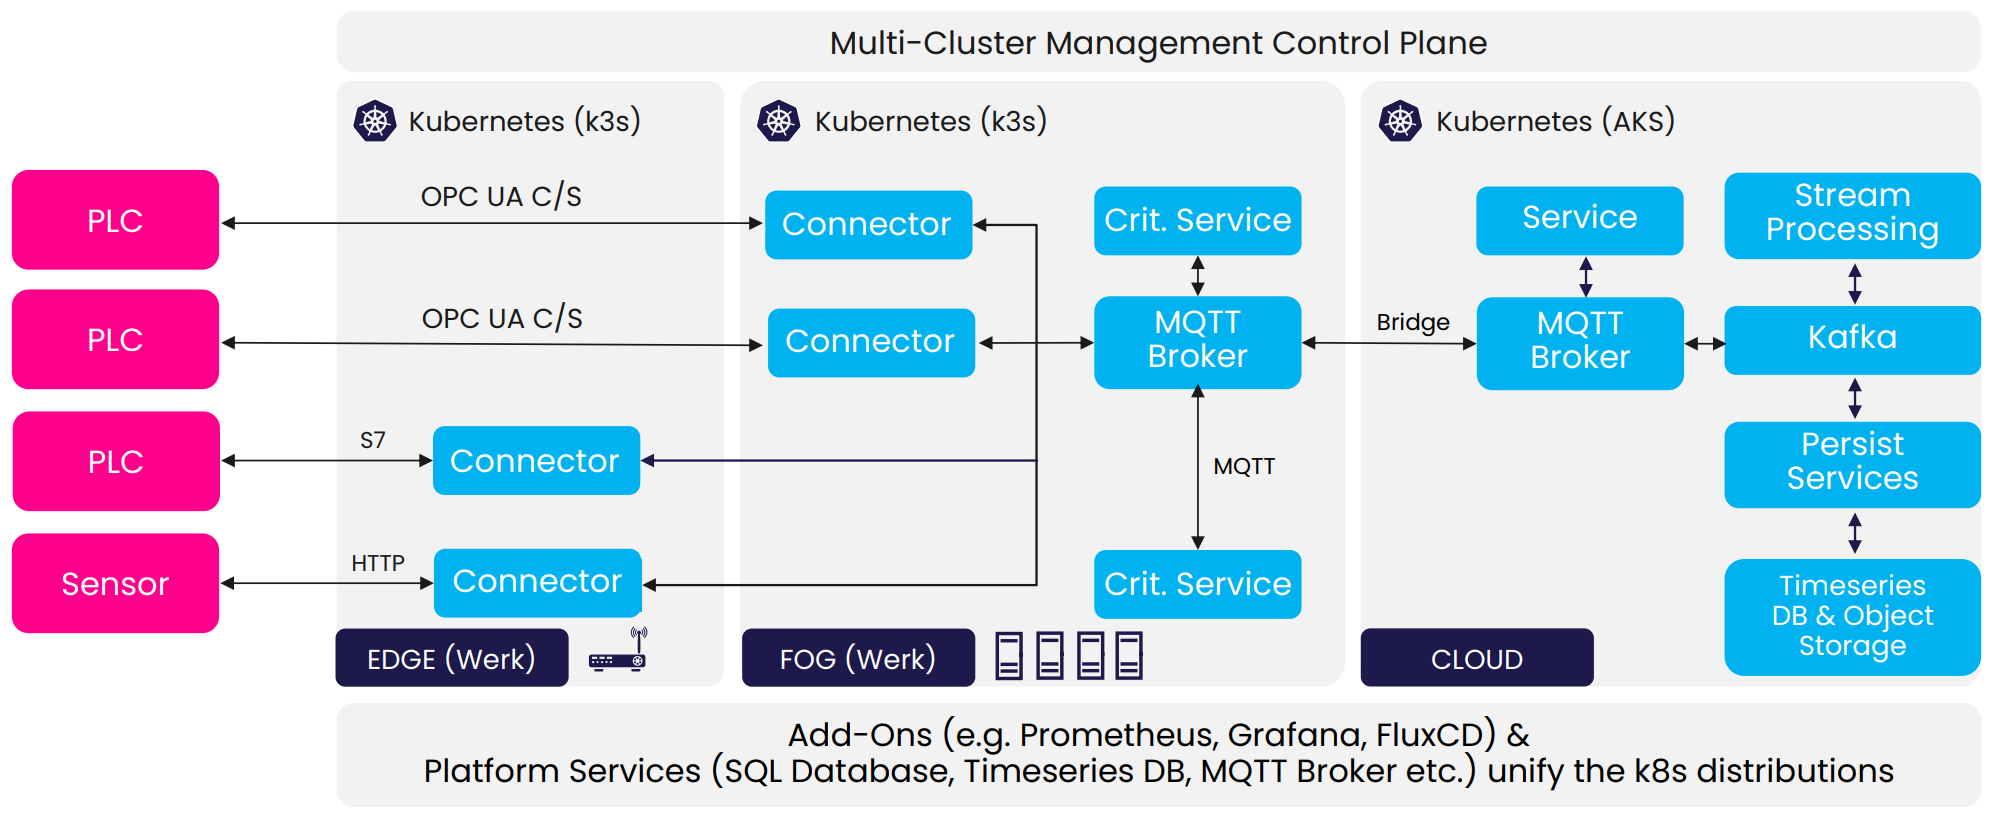 MaibornWolff Reference architecture from the talk "One size fits all" architecture for IIoT platforms by Marc an Sebastian, consiting of multiple Kubernetes blocks wiht several different connections to PLC and other hardware and microservies